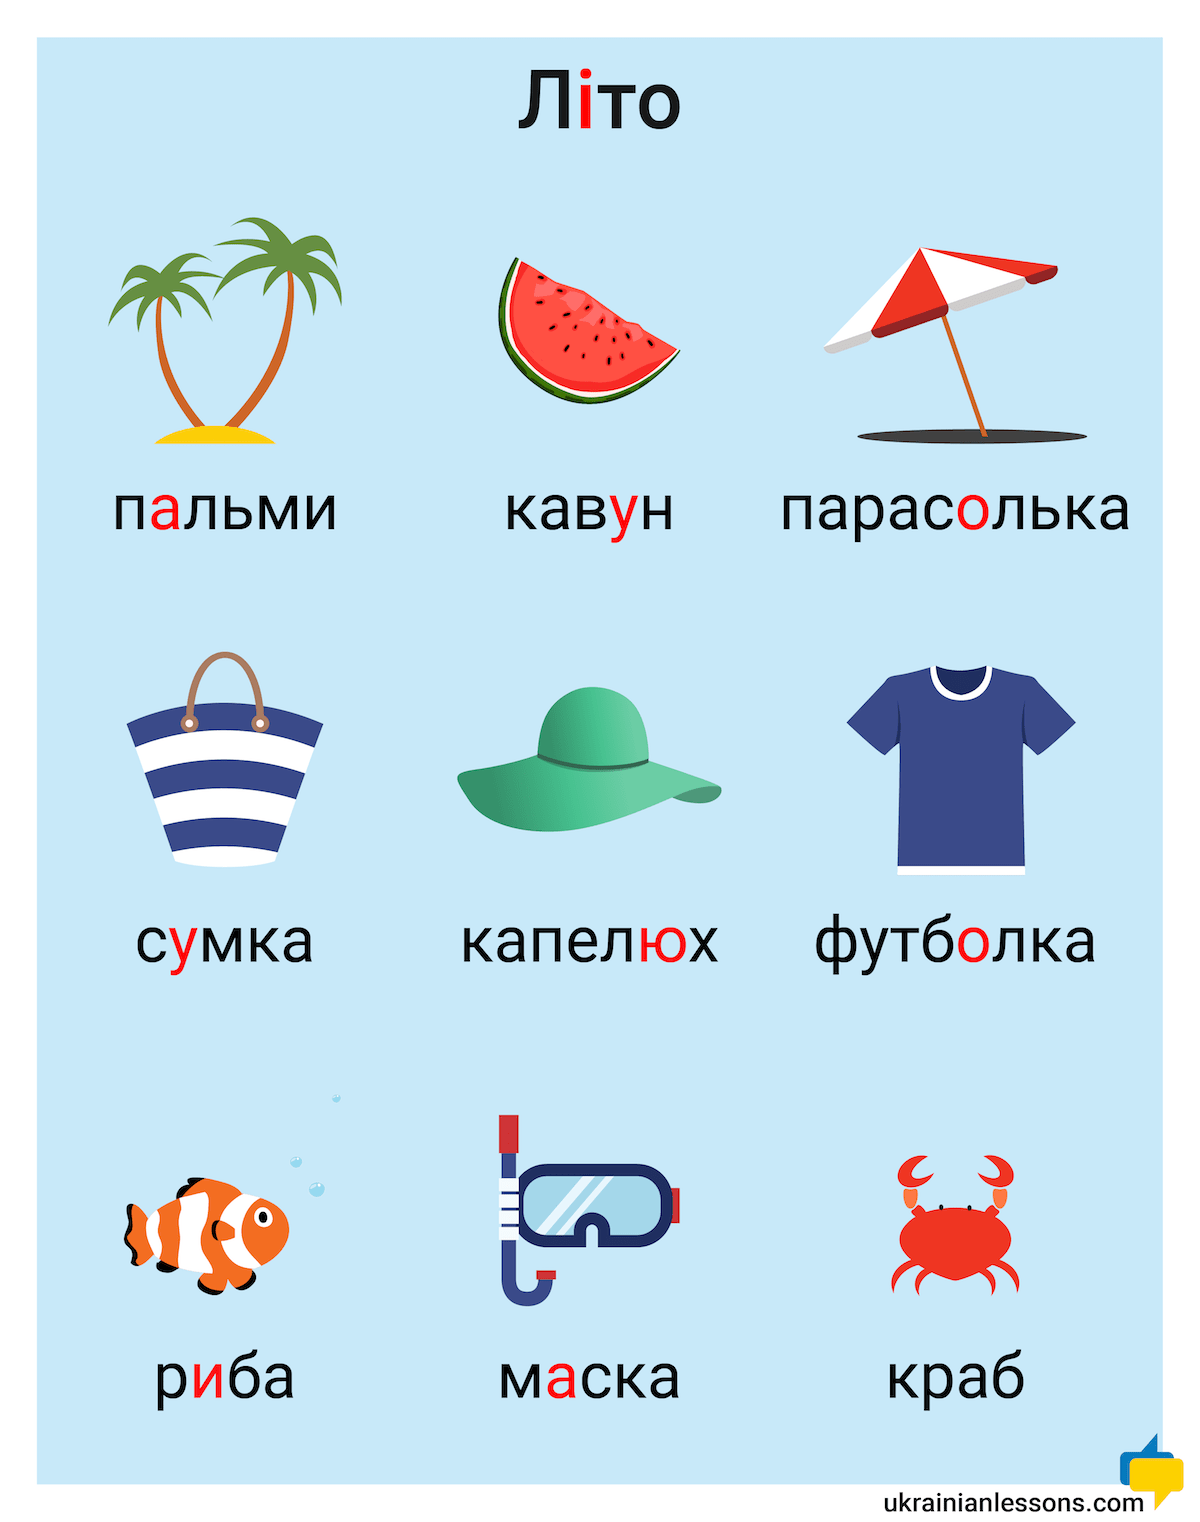 Літо — Summer Vocabulary in Ukrainian (with Illustrations and